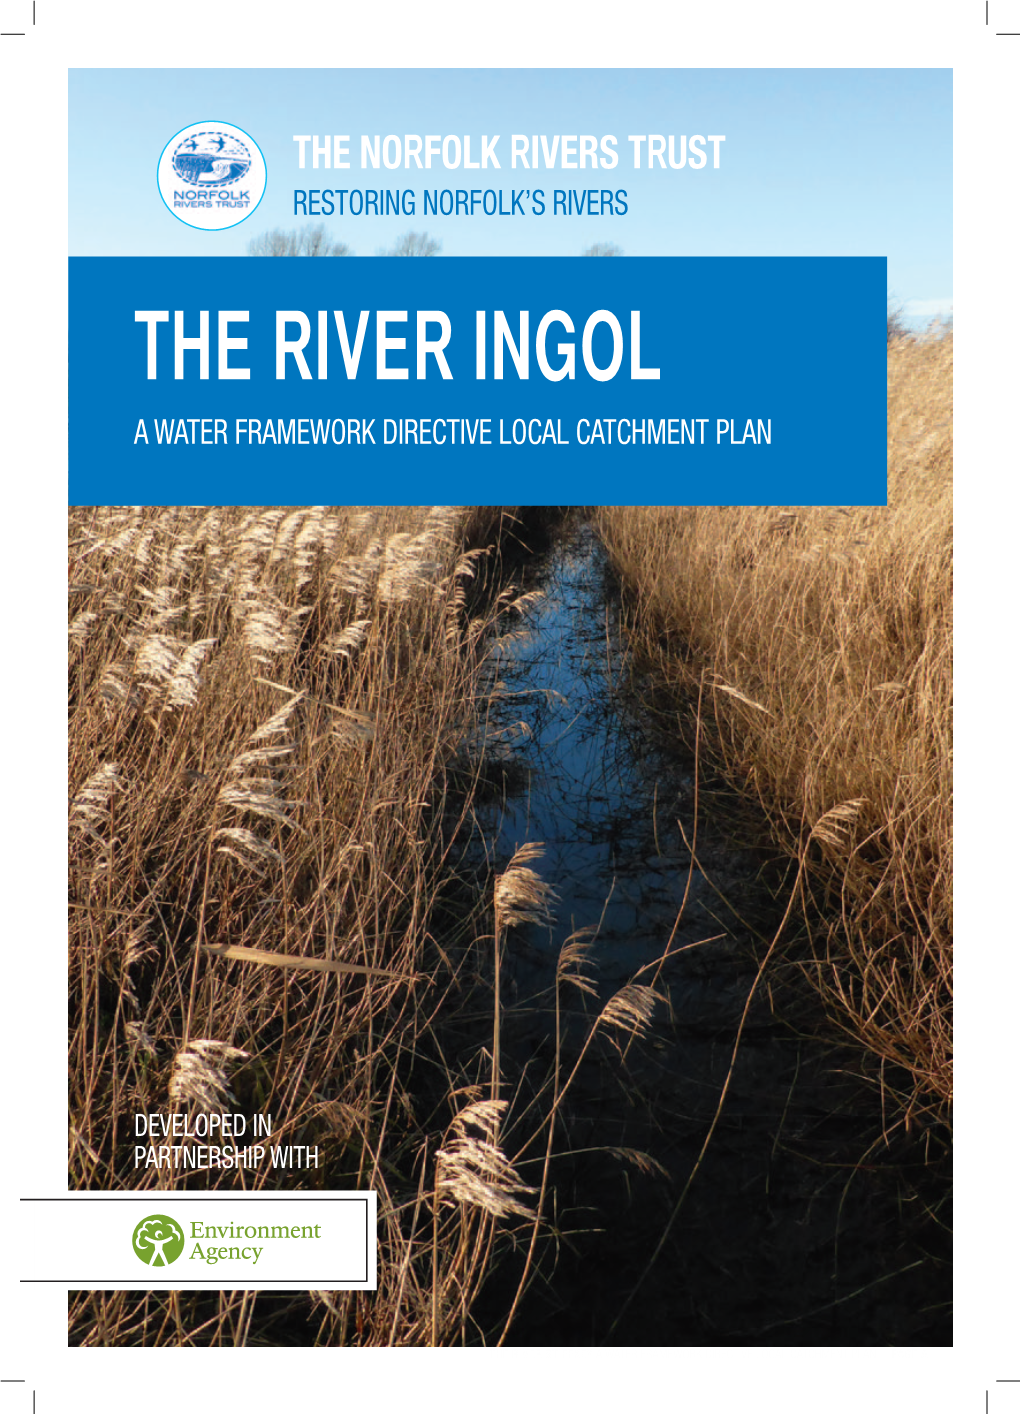 The River Ingol a Water Framework Directive Local Catchment Plan